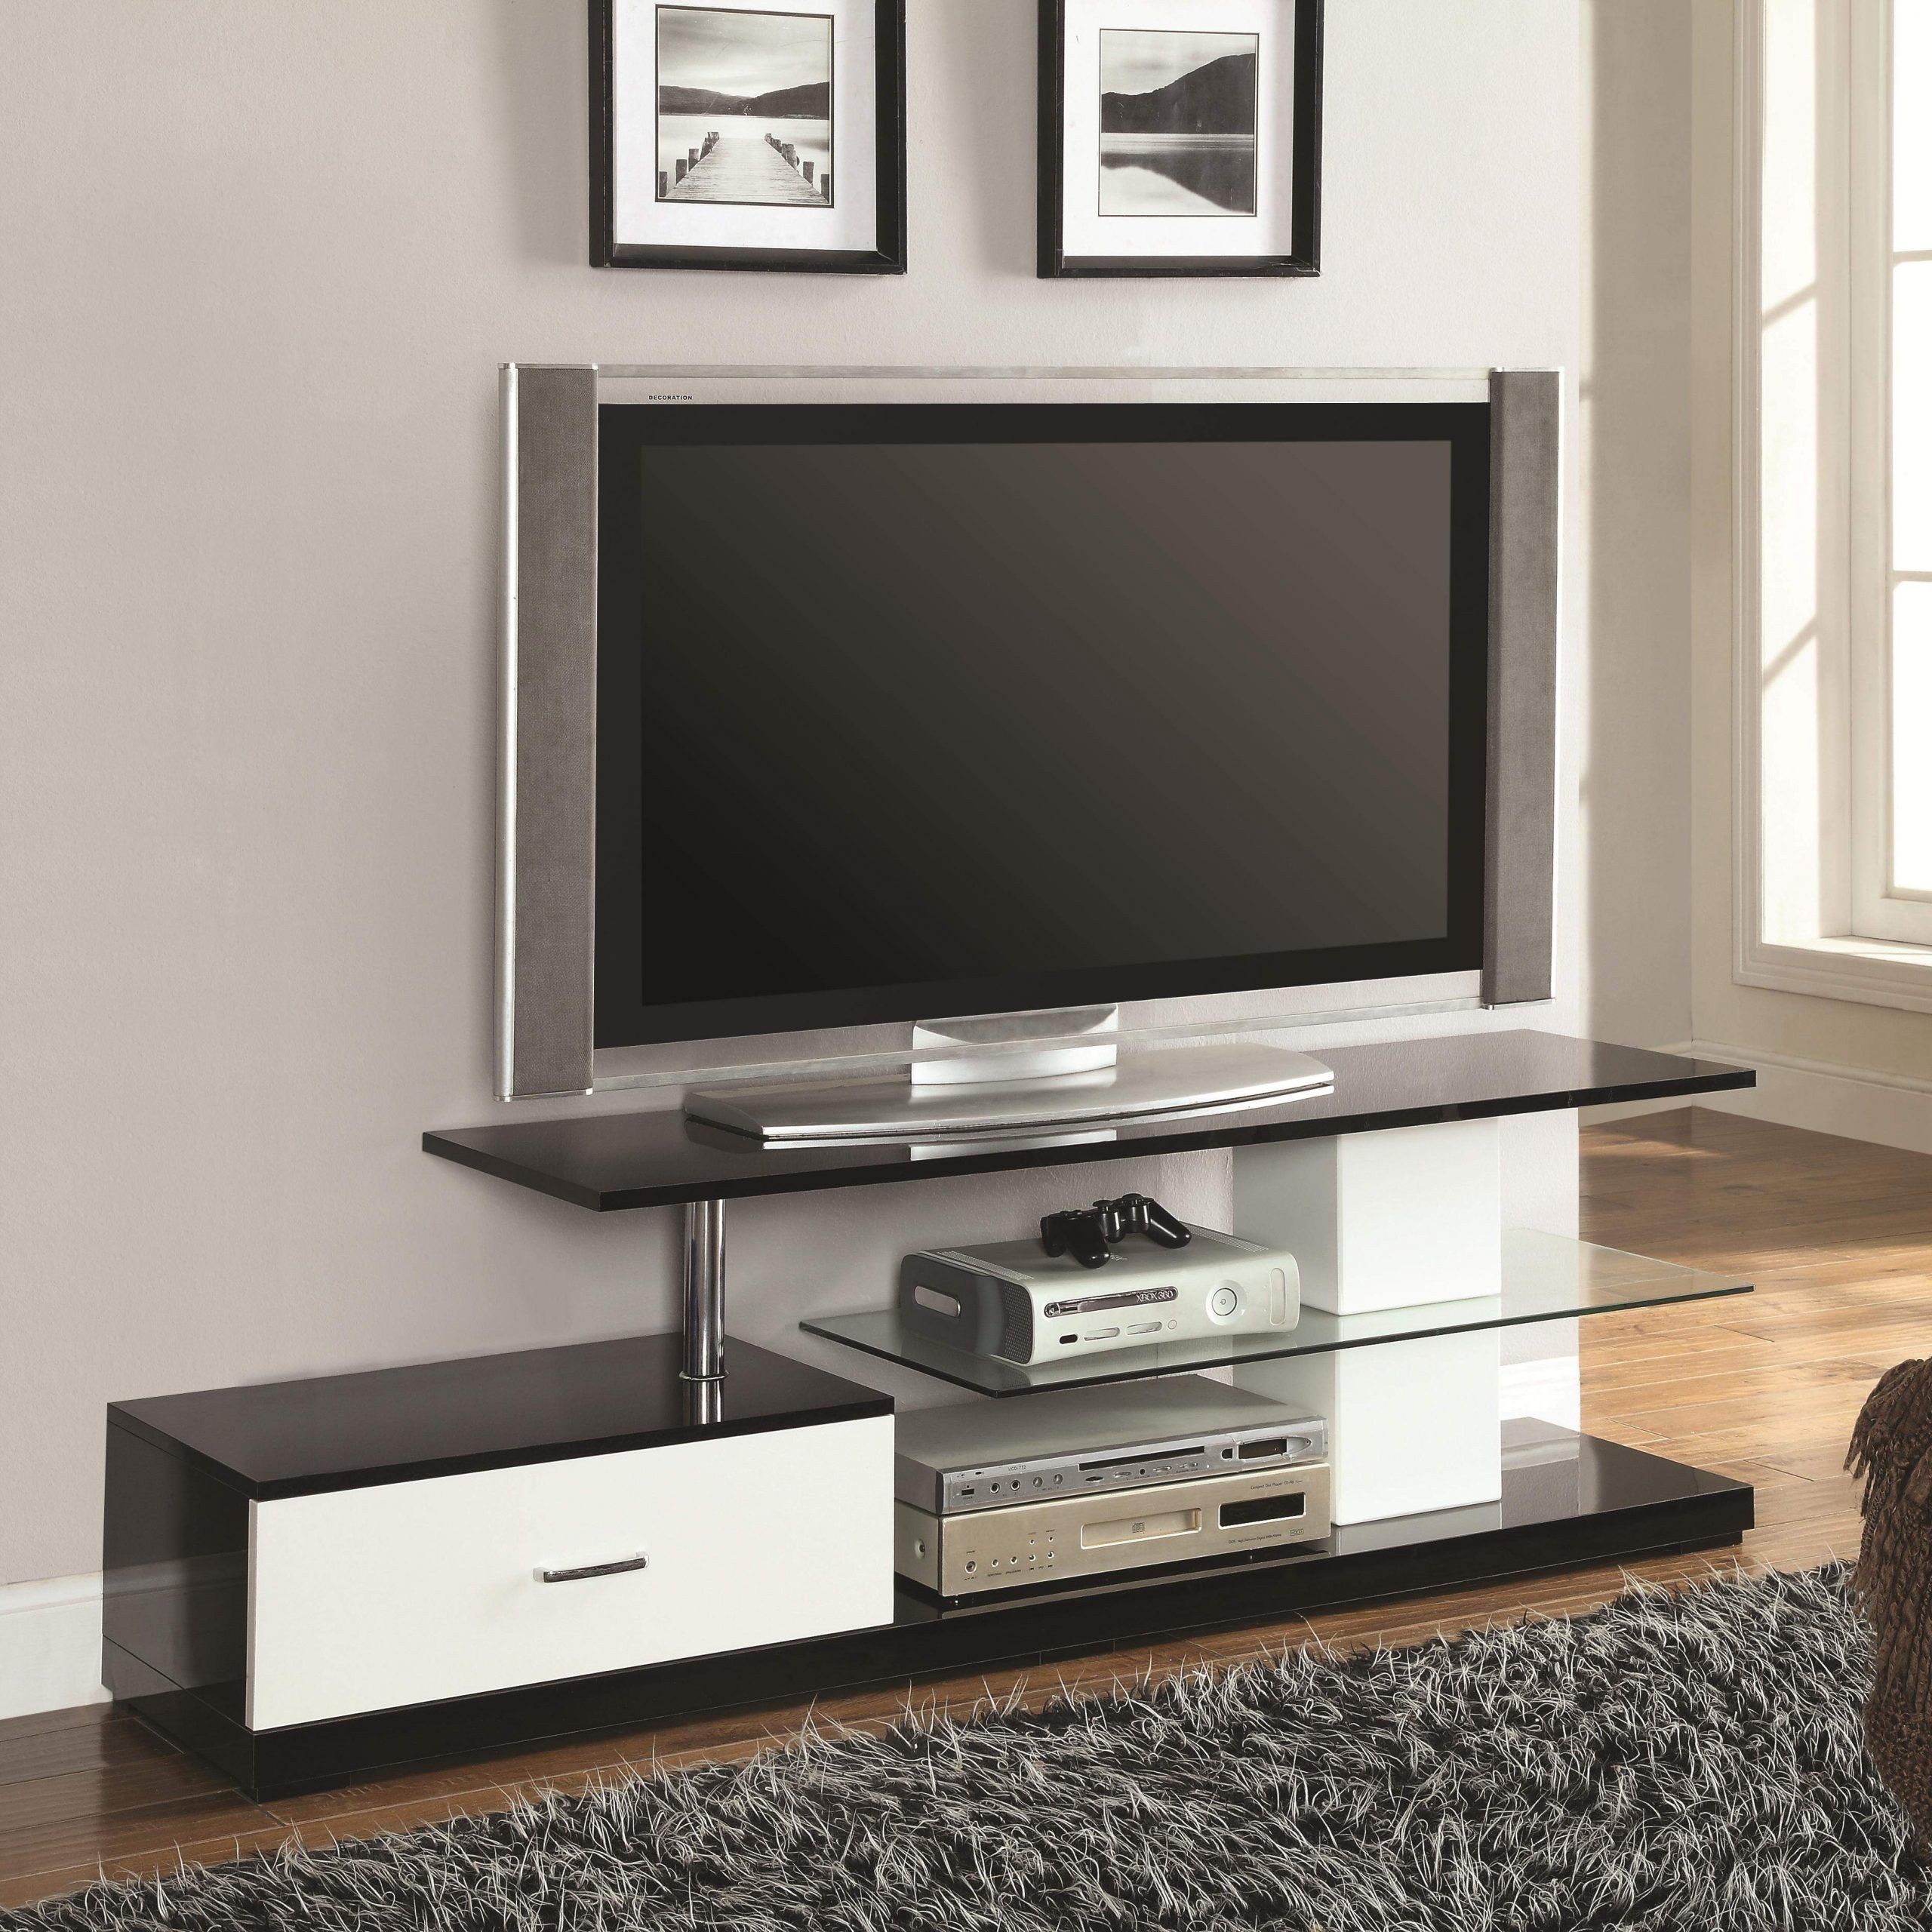 Tv Stands Black, Silver And White Tv Stand With Drawer And Throughout Glass Tv Stands (View 1 of 15)